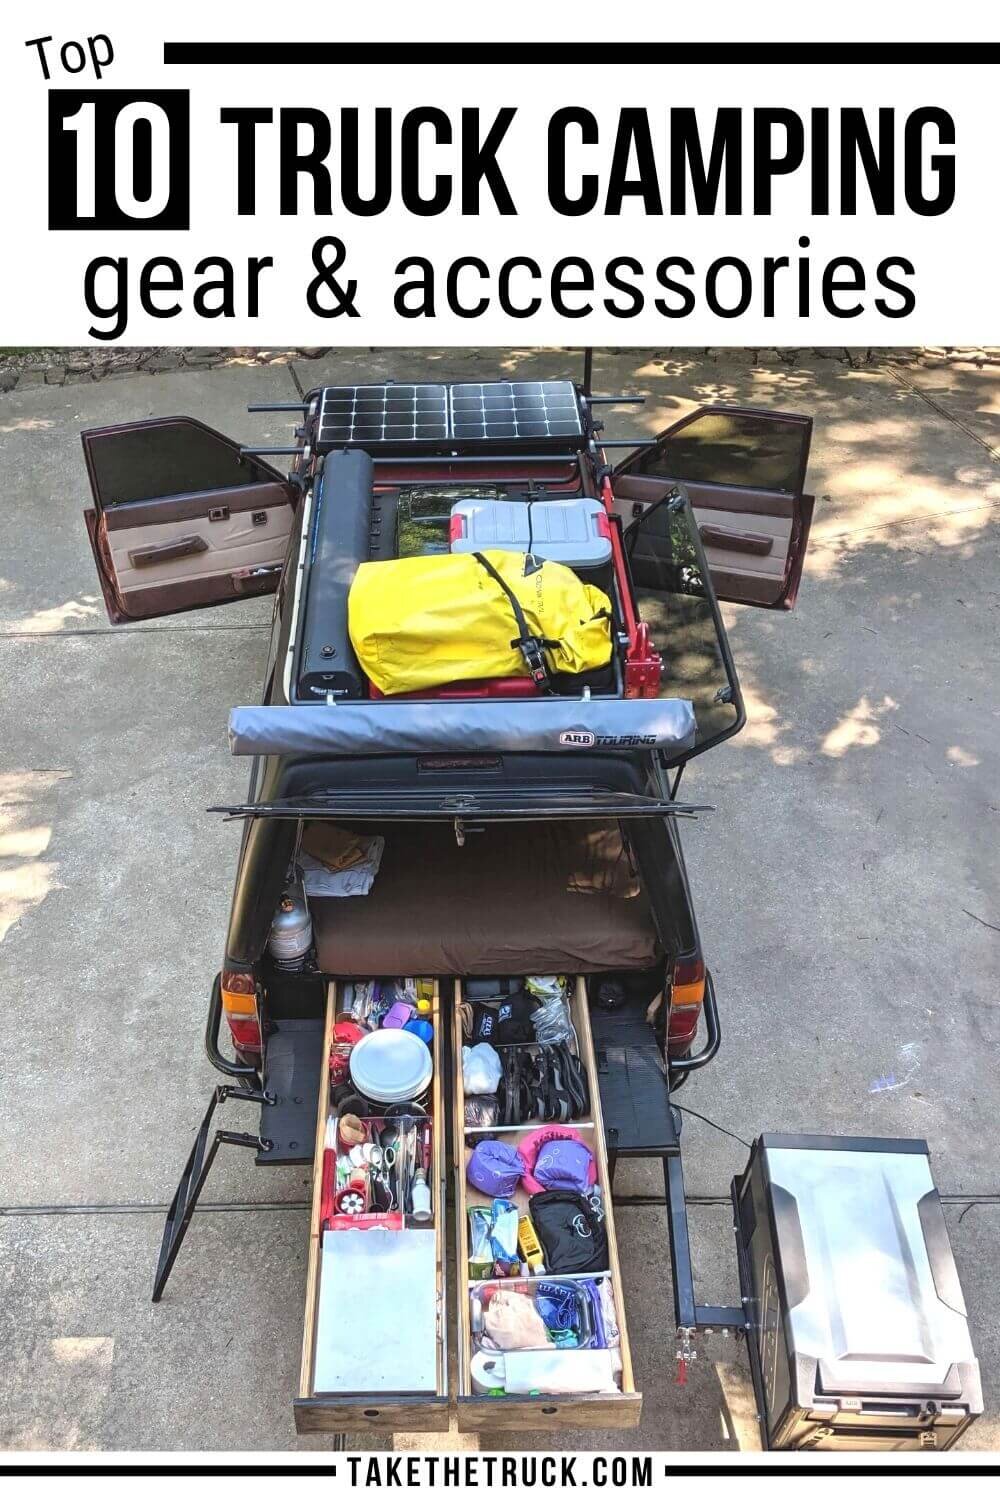 Top 10 truck camping accessories and truck bed camping gear or overland truck gear that we recommend, whether you’re new to pickup truck camping or an old pro!